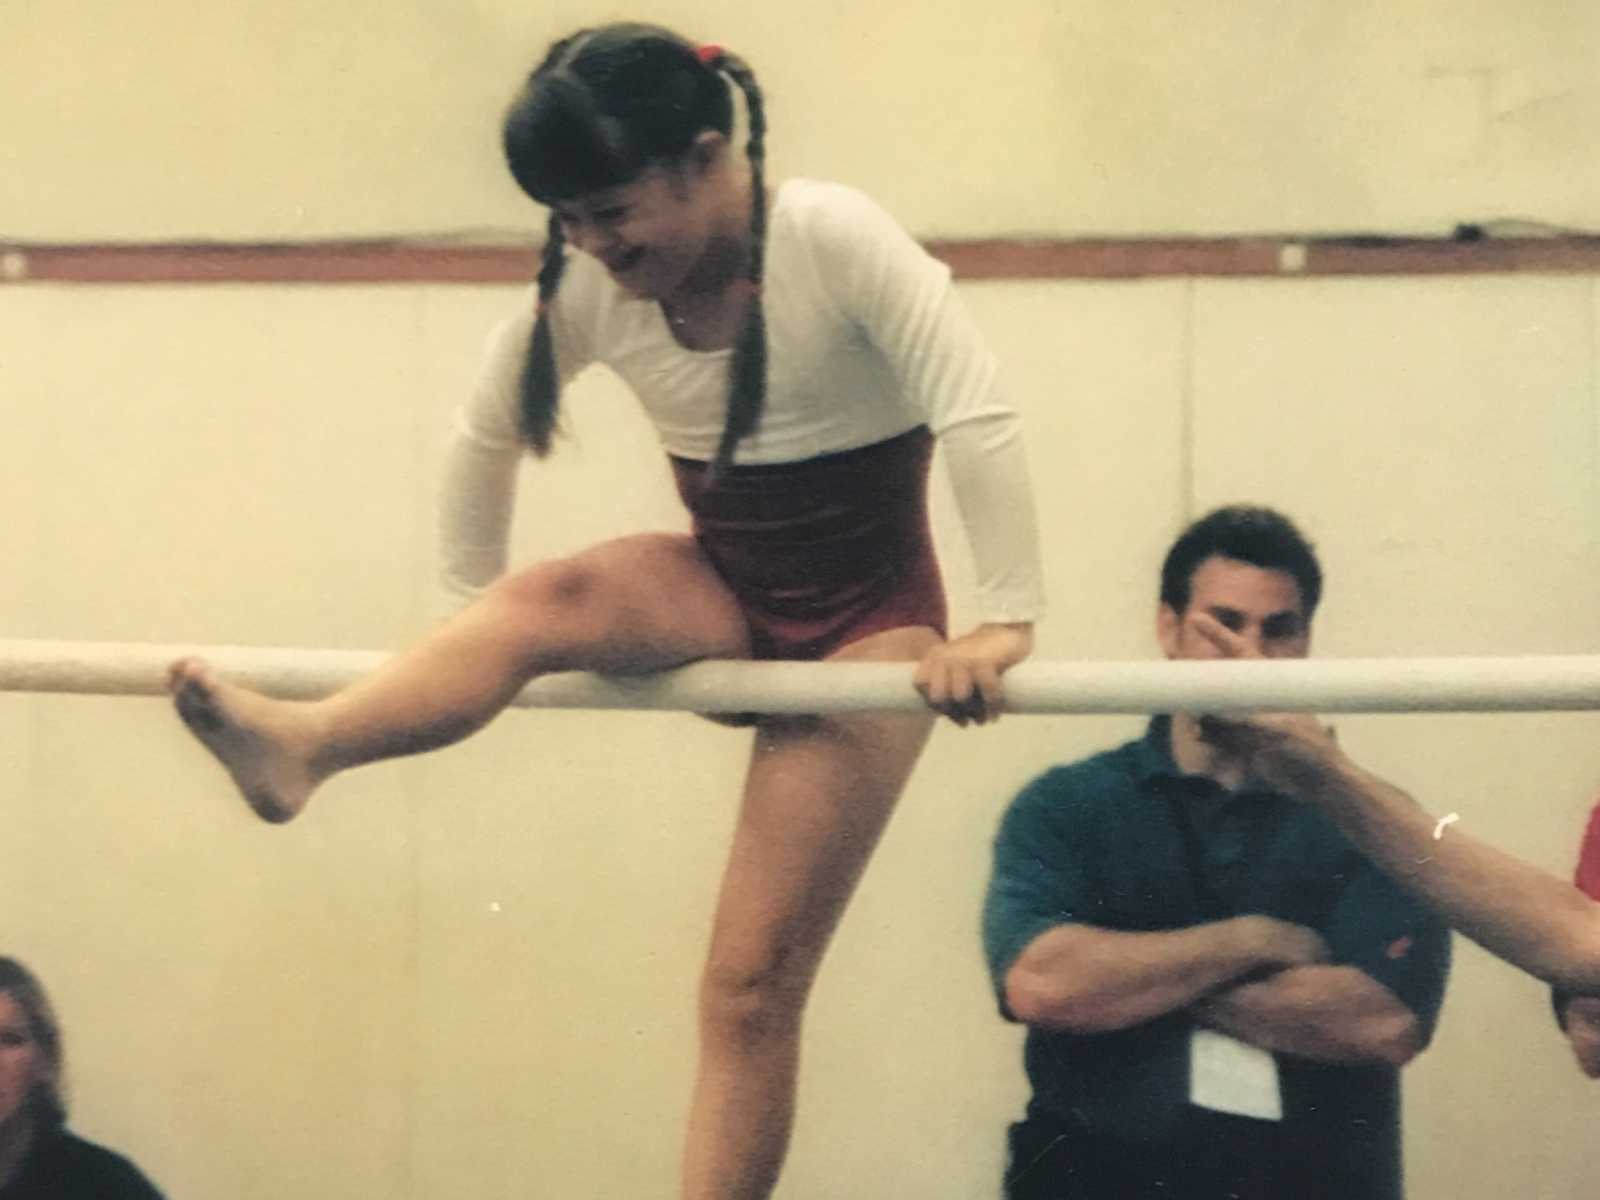 down syndrome child with braids wearing leotard on a gymnastics bar with a man close by for support